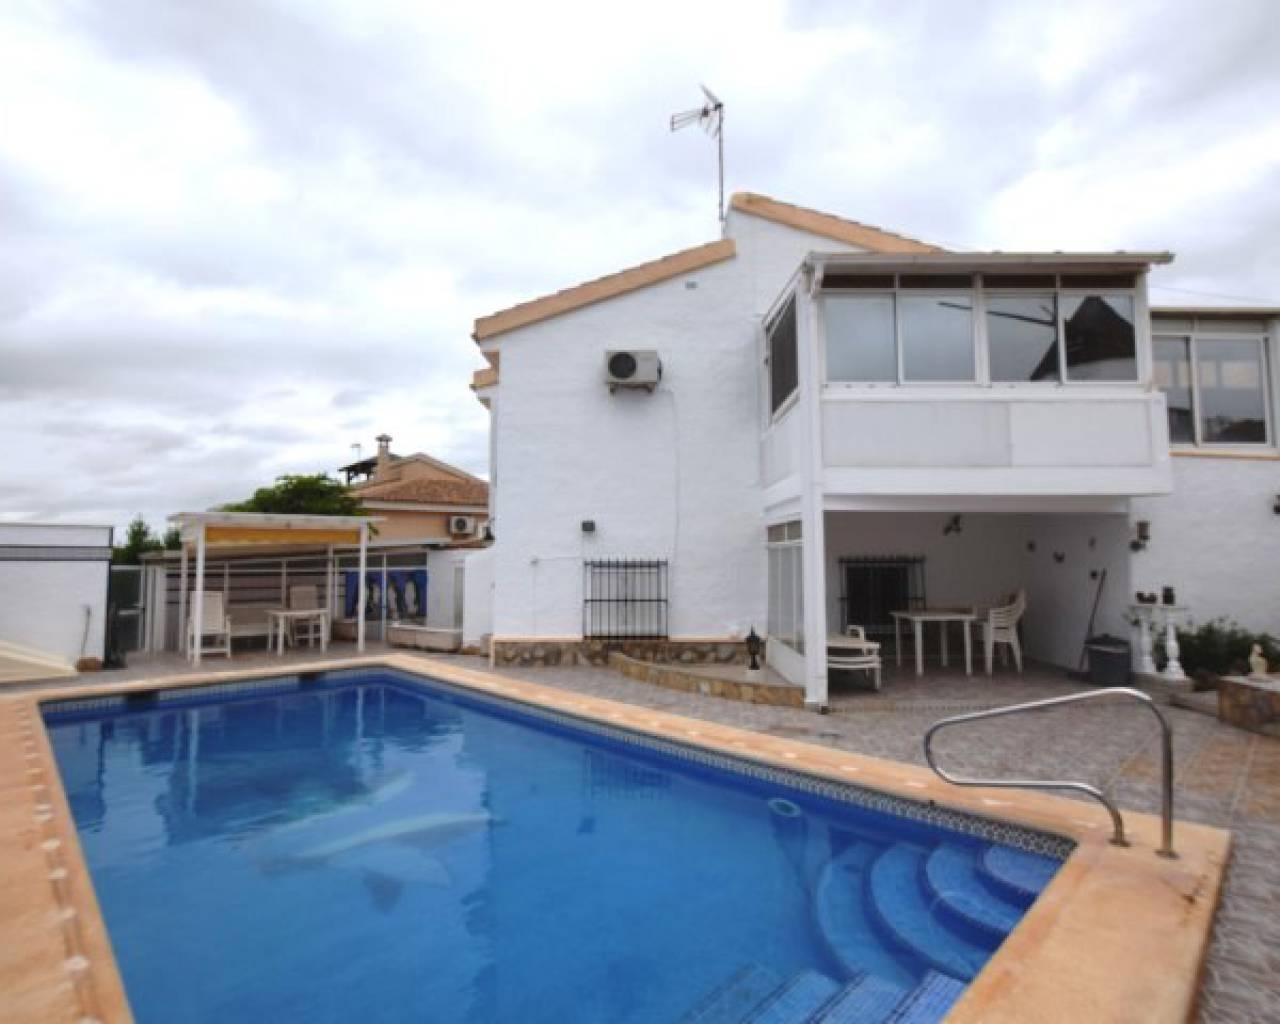 4 Bedroom Villa With Private Pool Near Golf Course